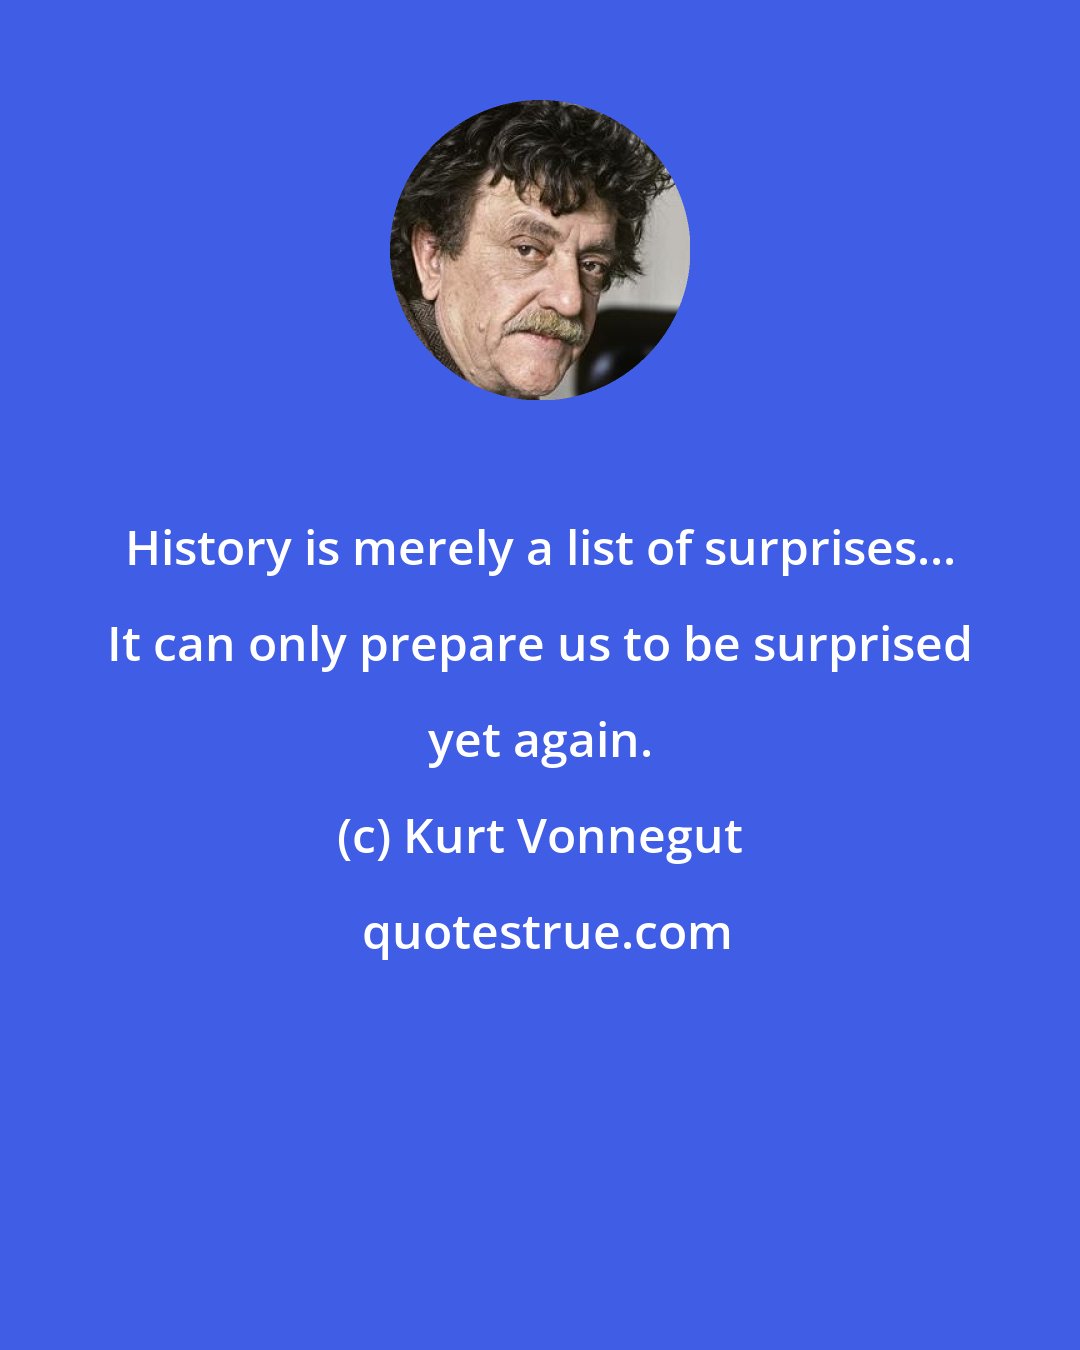 Kurt Vonnegut: History is merely a list of surprises... It can only prepare us to be surprised yet again.